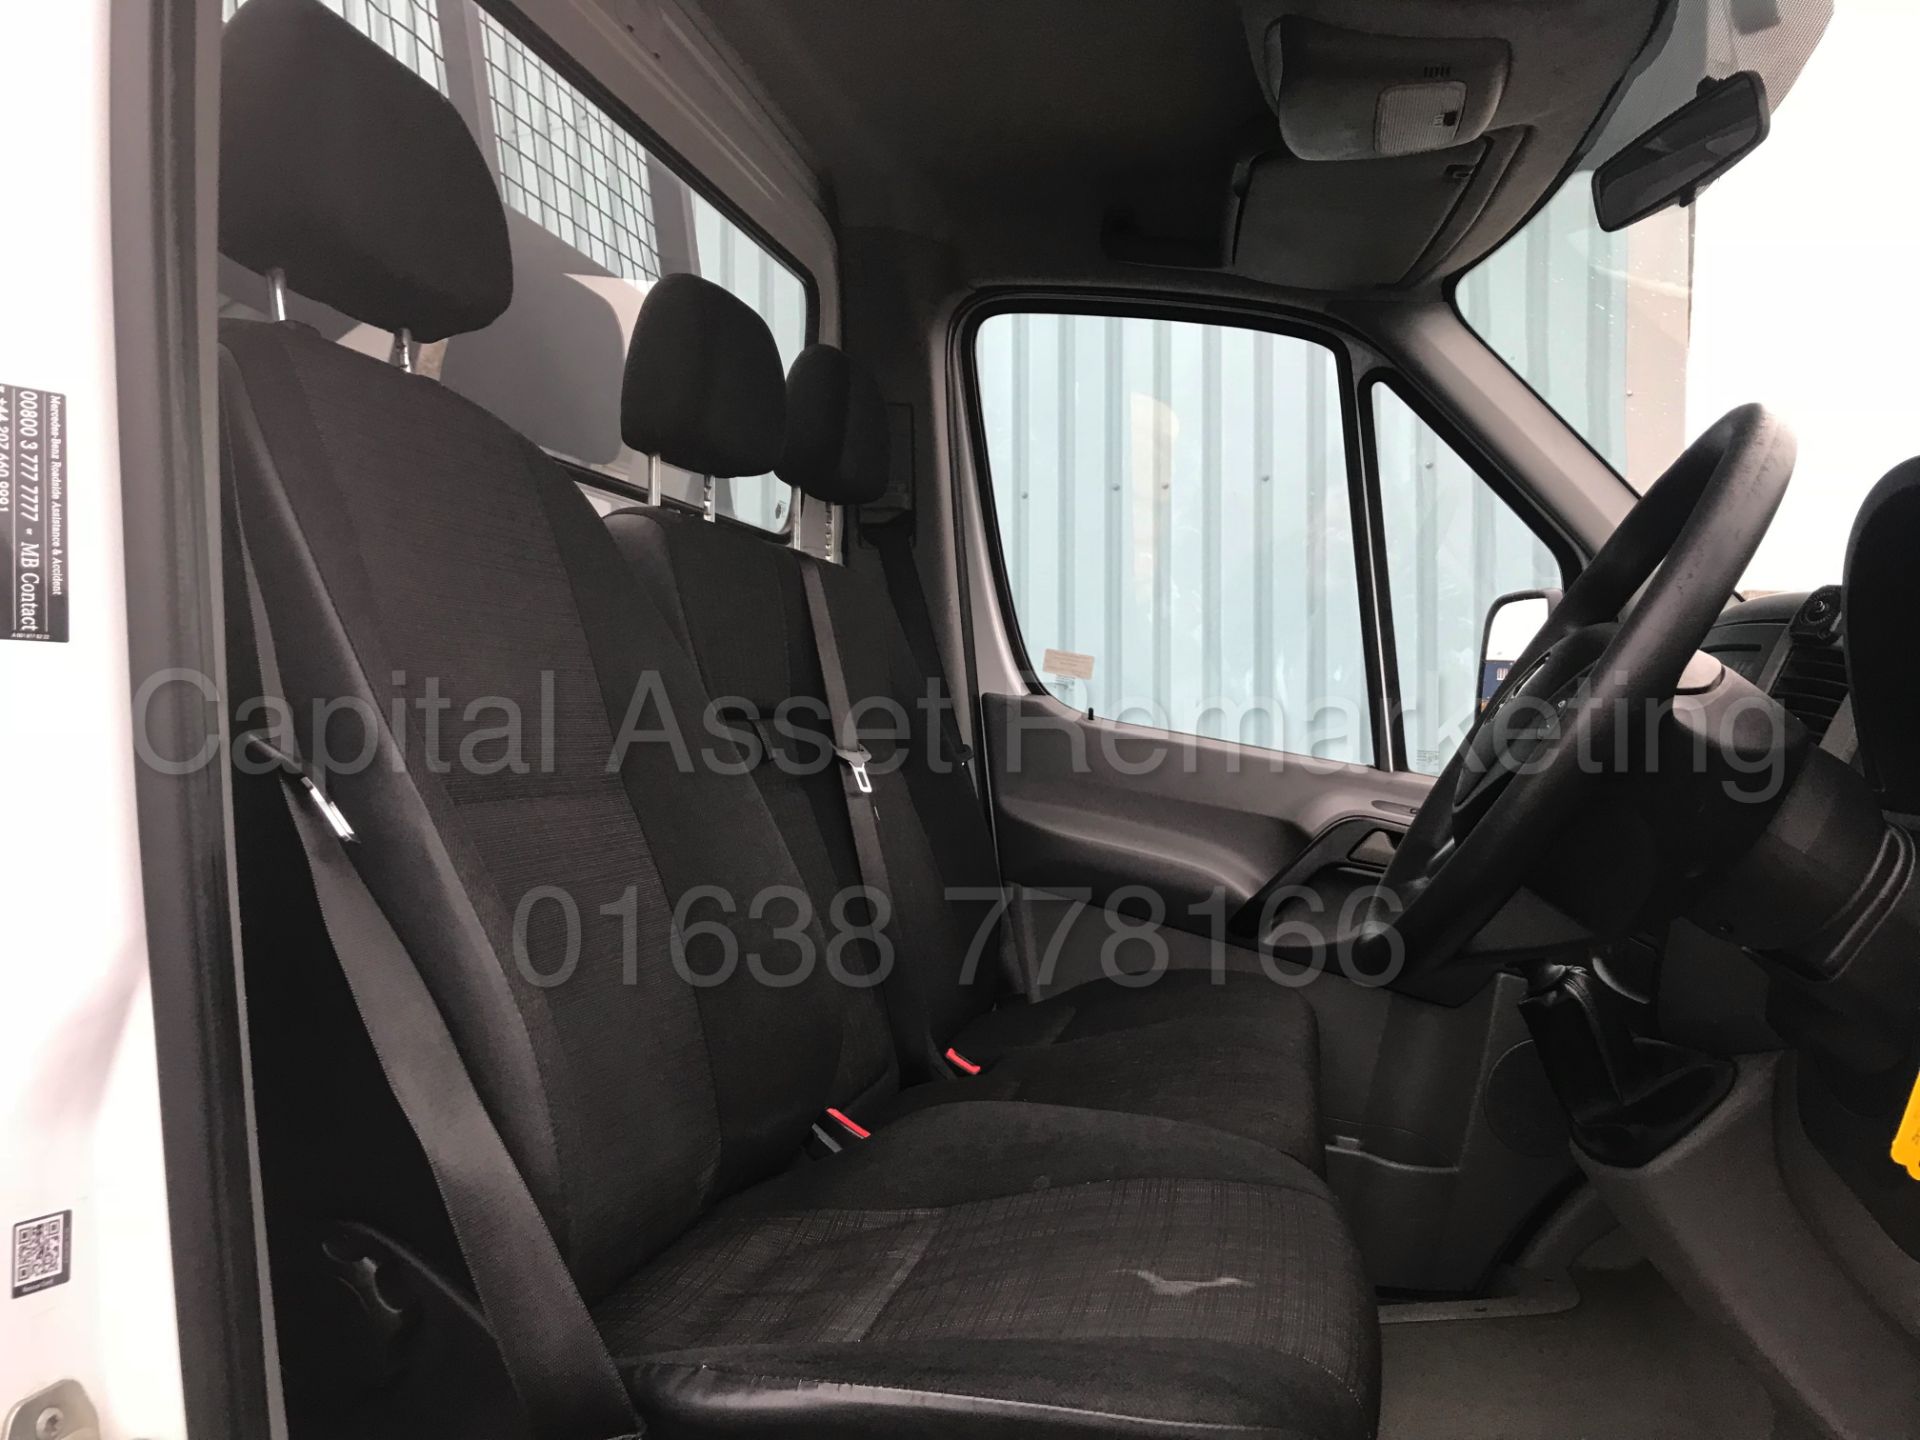 (ON SALE) MERCEDES-BENZ SPRINTER 313 CDI 'LWB - TIPPER' (2014 FACELIFT) '130 BHP -6 SPEED' *1 OWNER* - Image 15 of 24